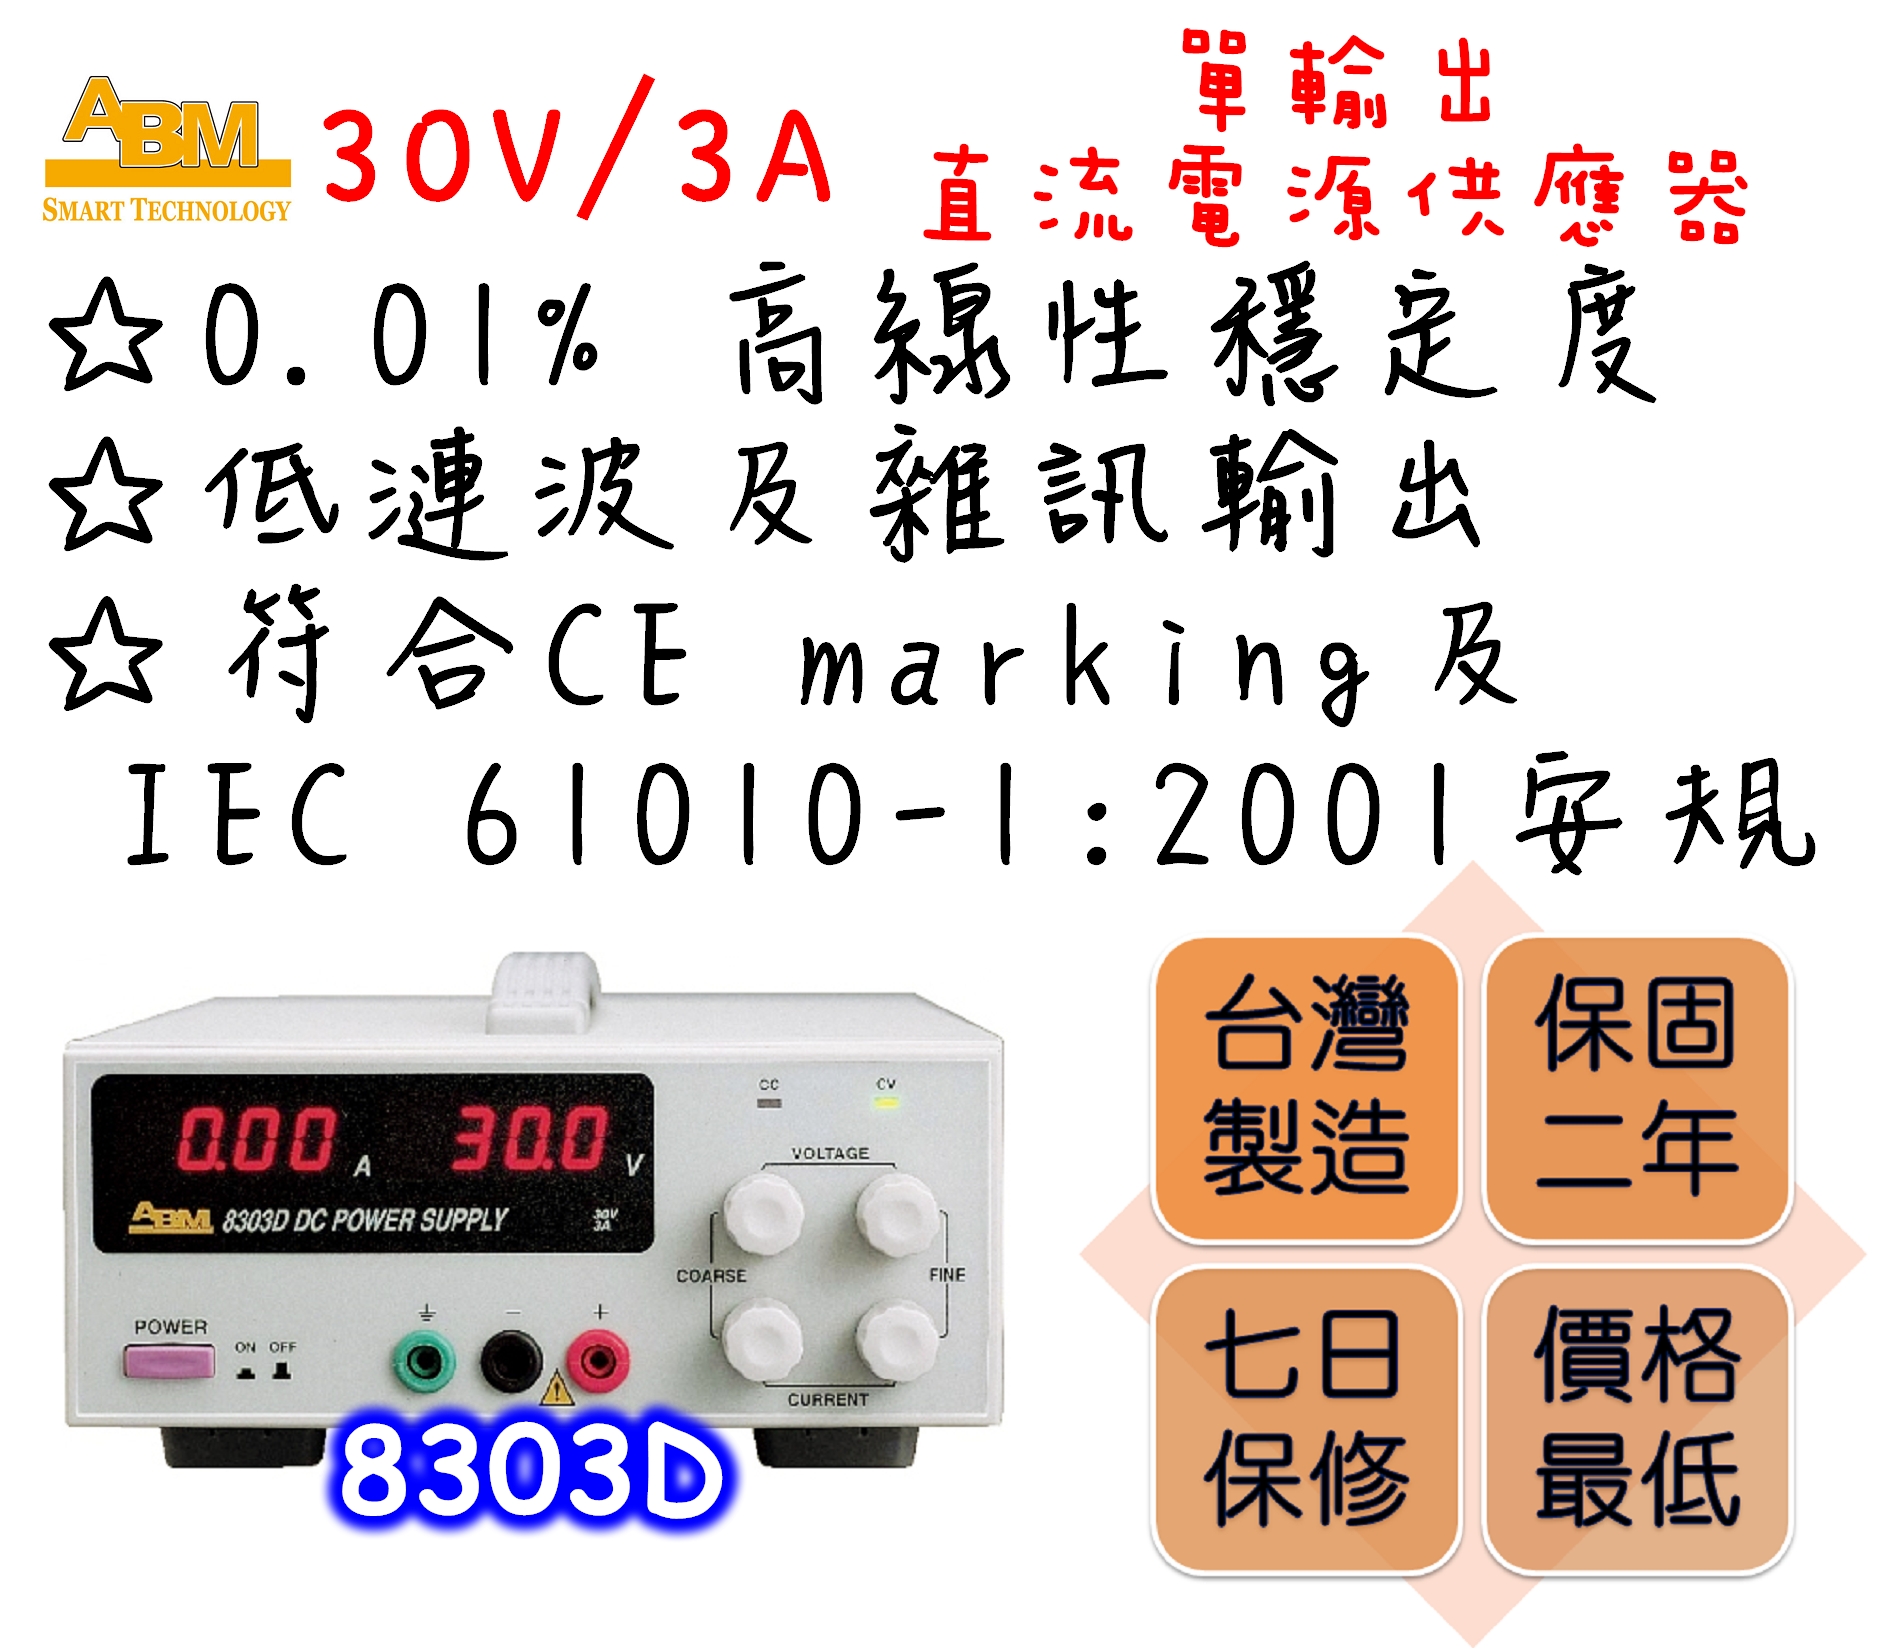 Constant voltage and constant current modes.
Output shortage and reversed current feeding protections.
0.01% high linear stability.
3-1/2 digits digital displays for both voltage and current outputs.
Automatic dual speed cooling fan design to reduce fan noise.
Low ripple and noise output.
Comply with CE marking and IEC 61010-1:2001 safety regulations